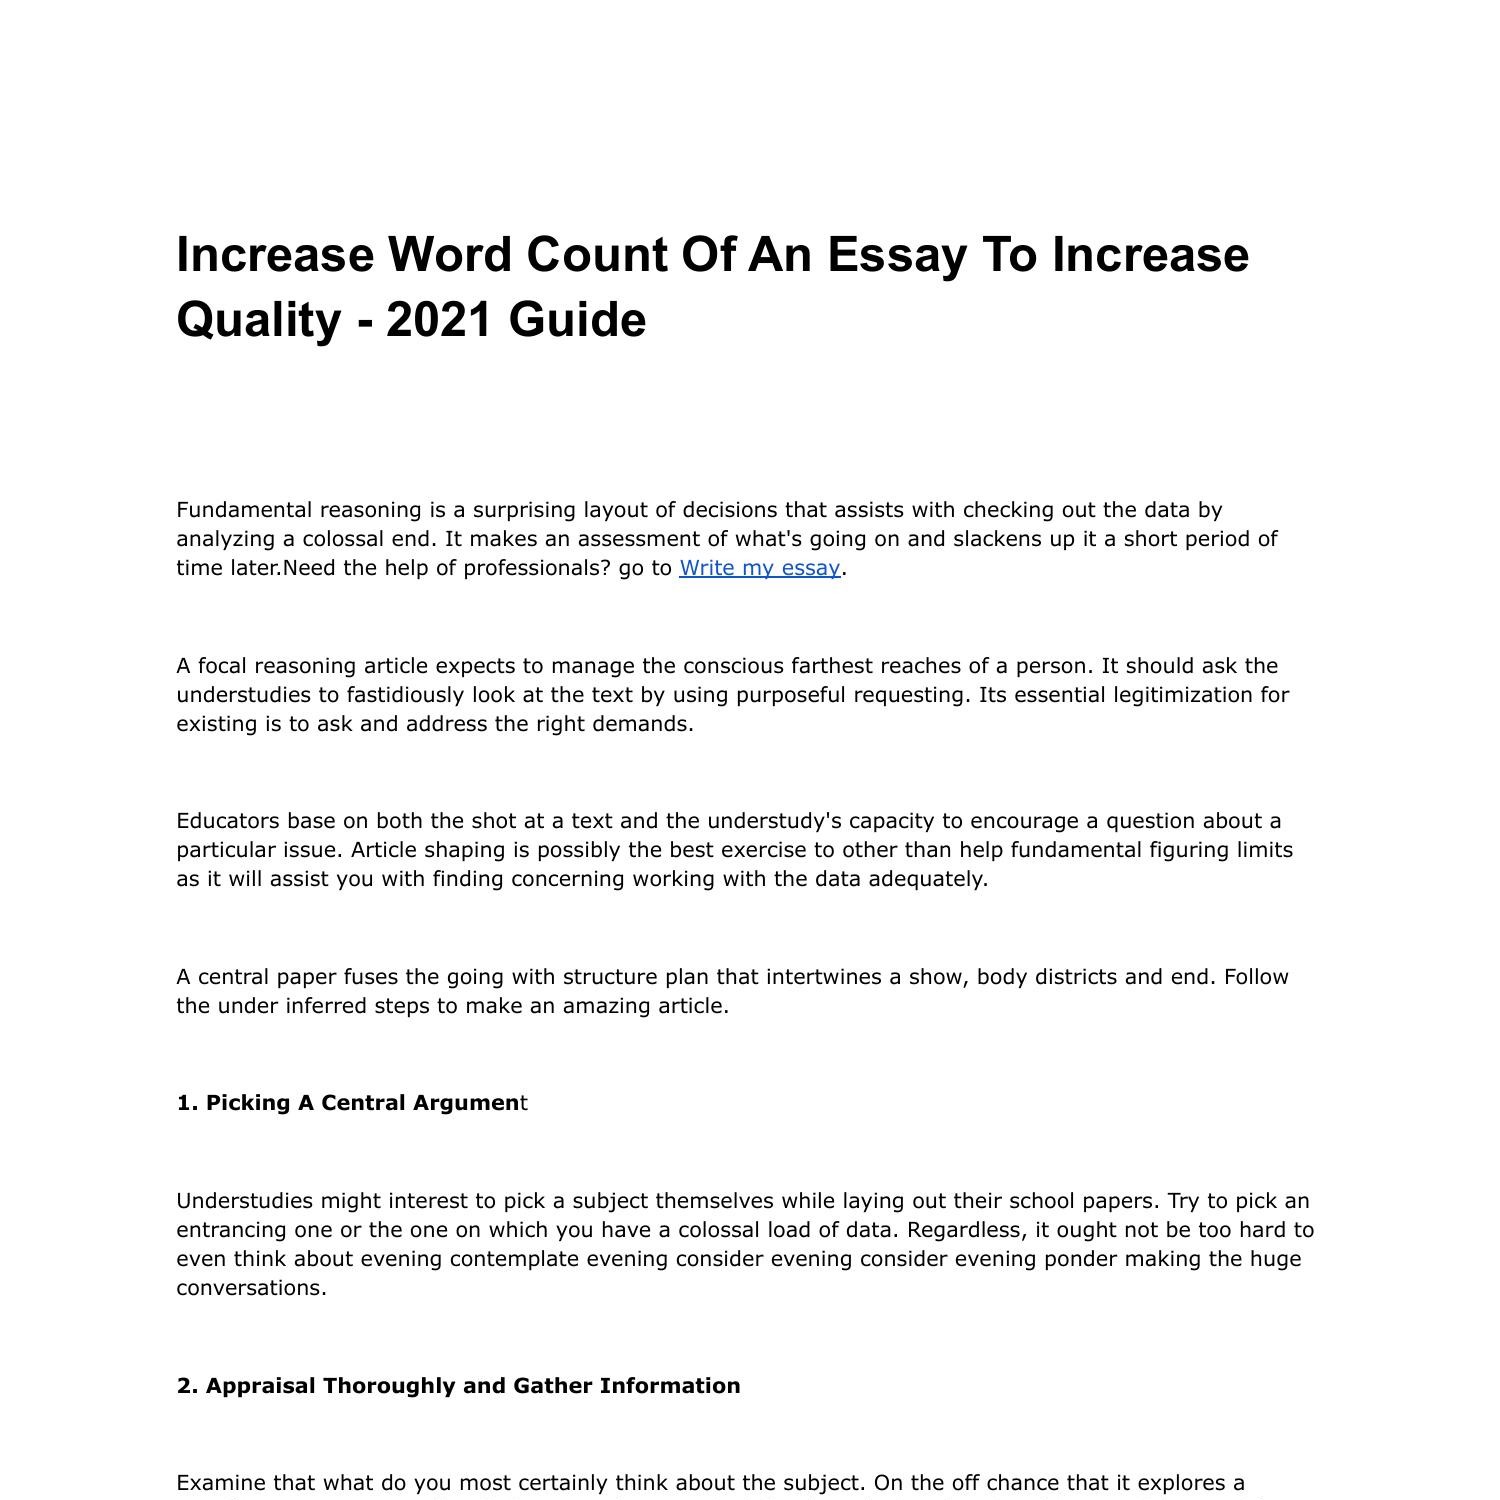 hl essay word count 2021